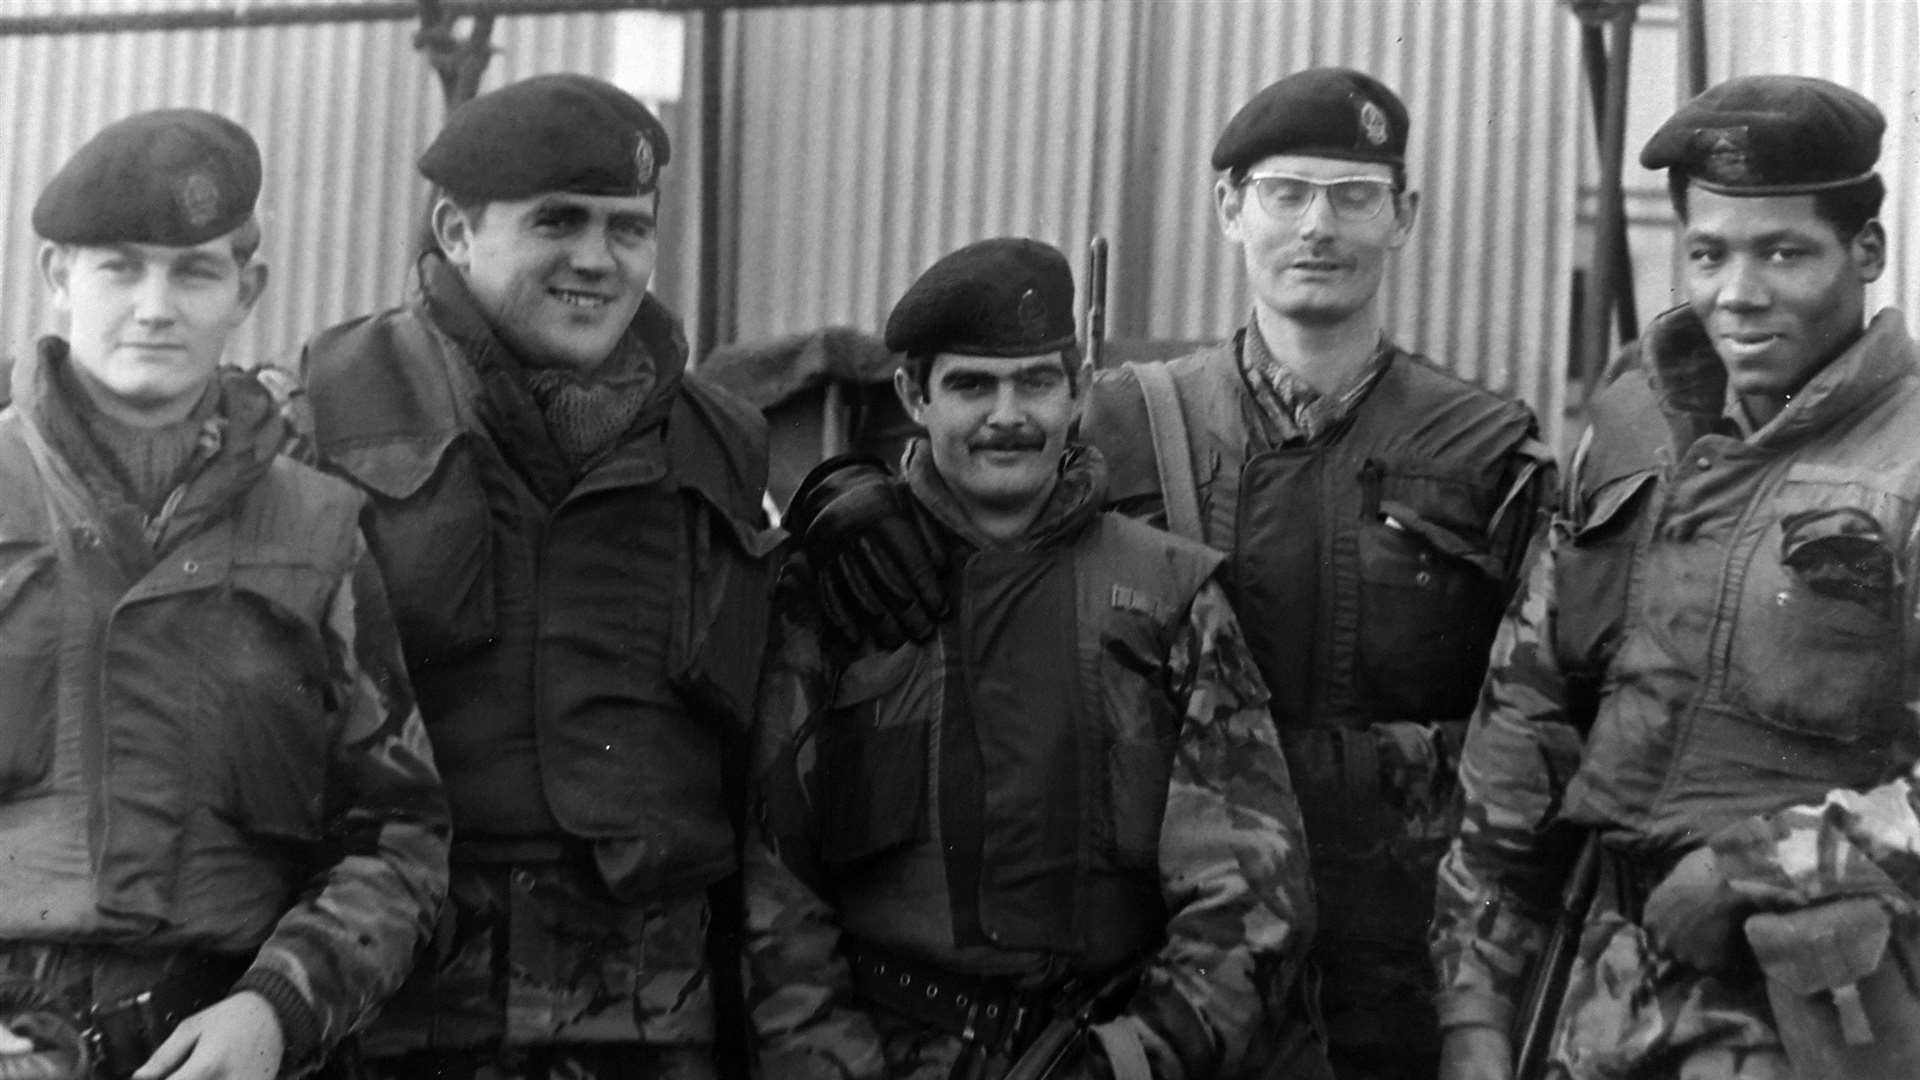 James 'Blue' Cooper (second from right) with fellow Vipers in Northern Ireland